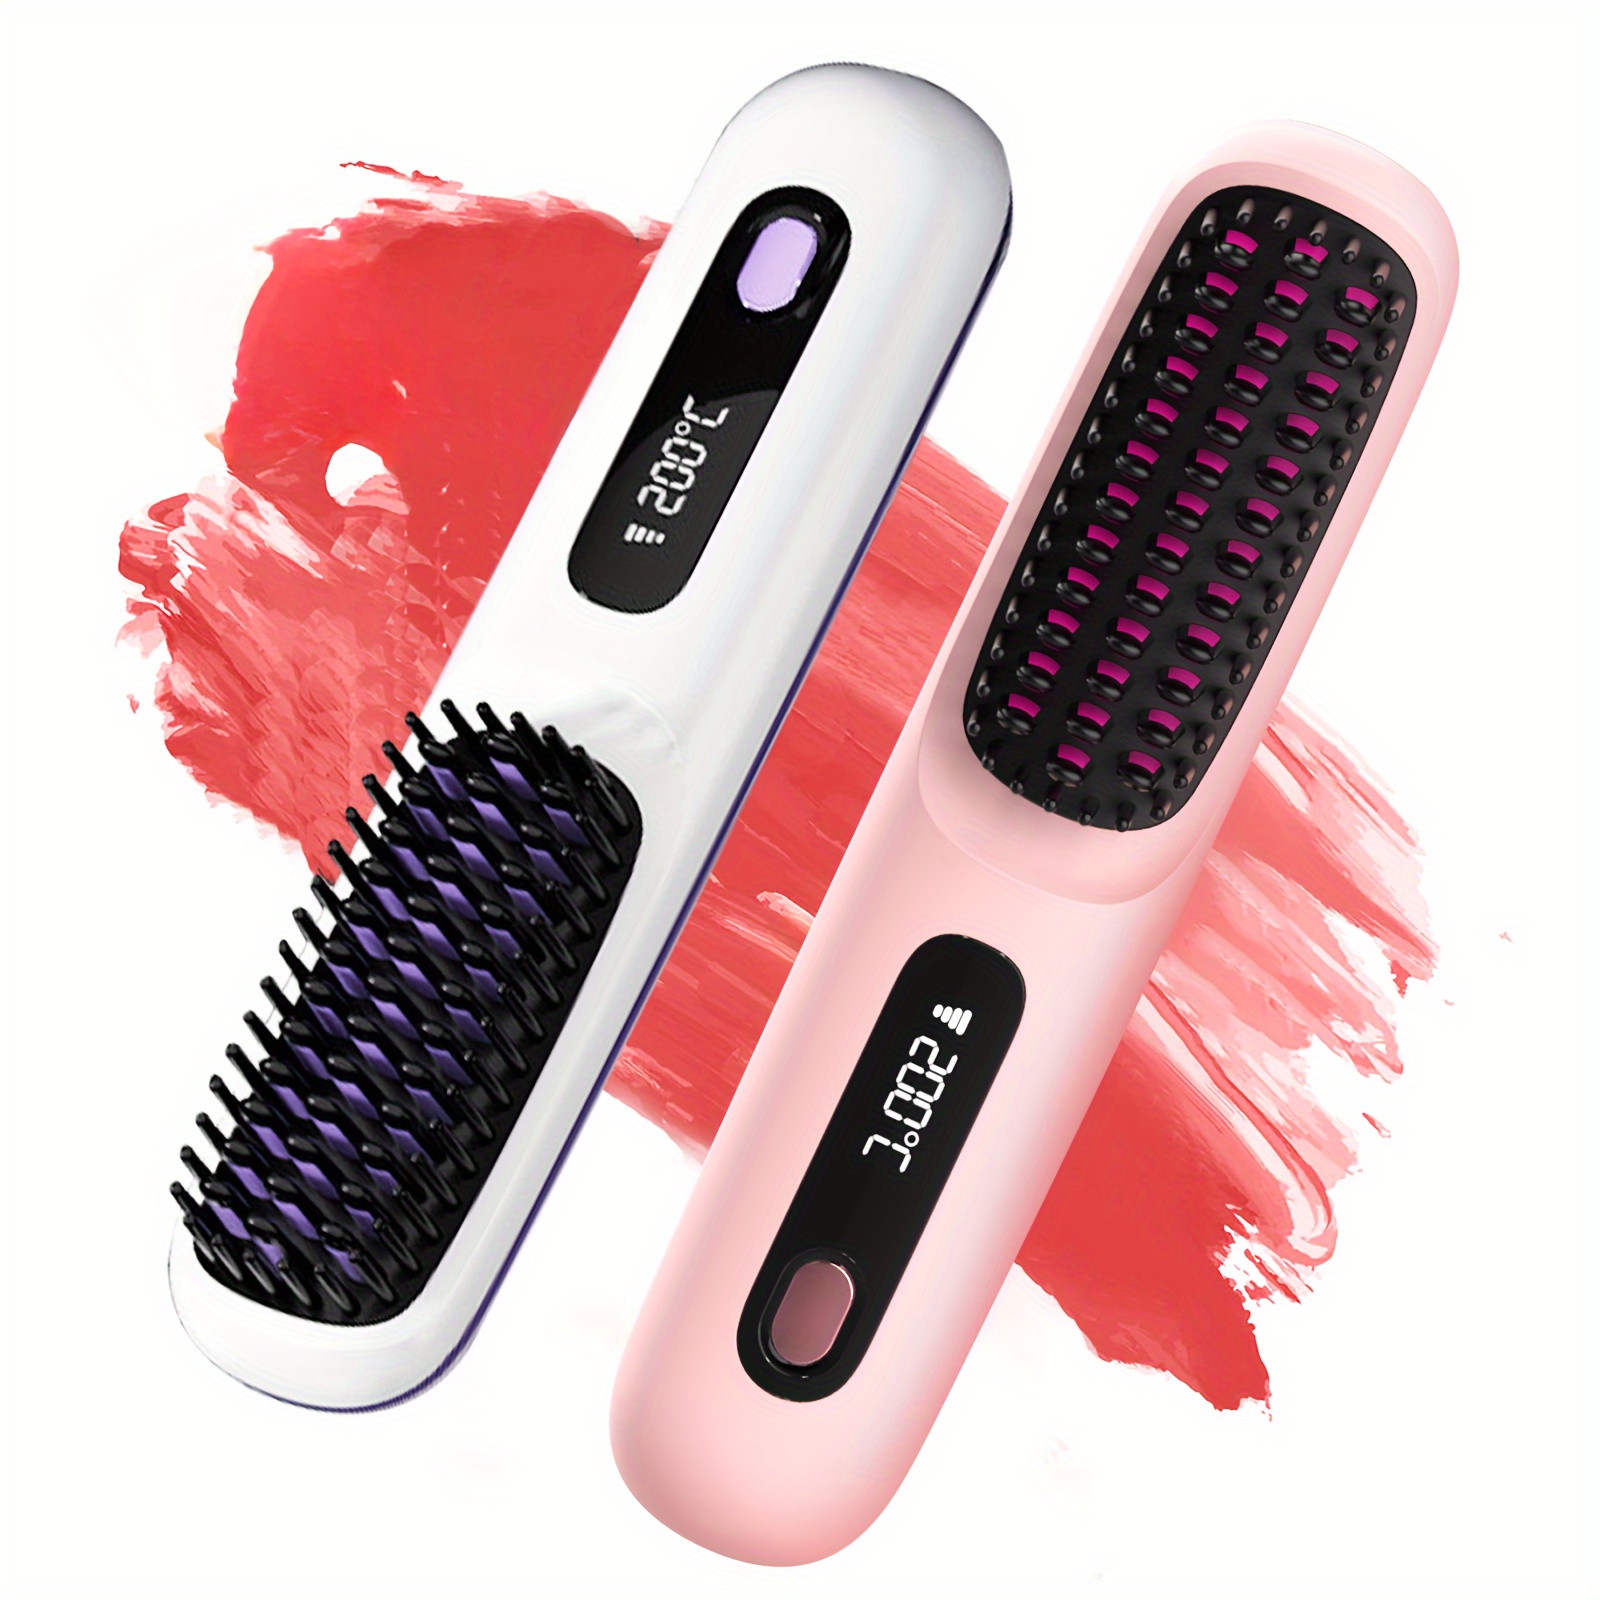 

Wireless Hair Straightener Brush, Portable Negative Ion Hot Comb With Usb Rechargeable Feature, Fast Heating 3 Temp Settings Anti-scald, 20mins Auto-off, For Travel Daily Use